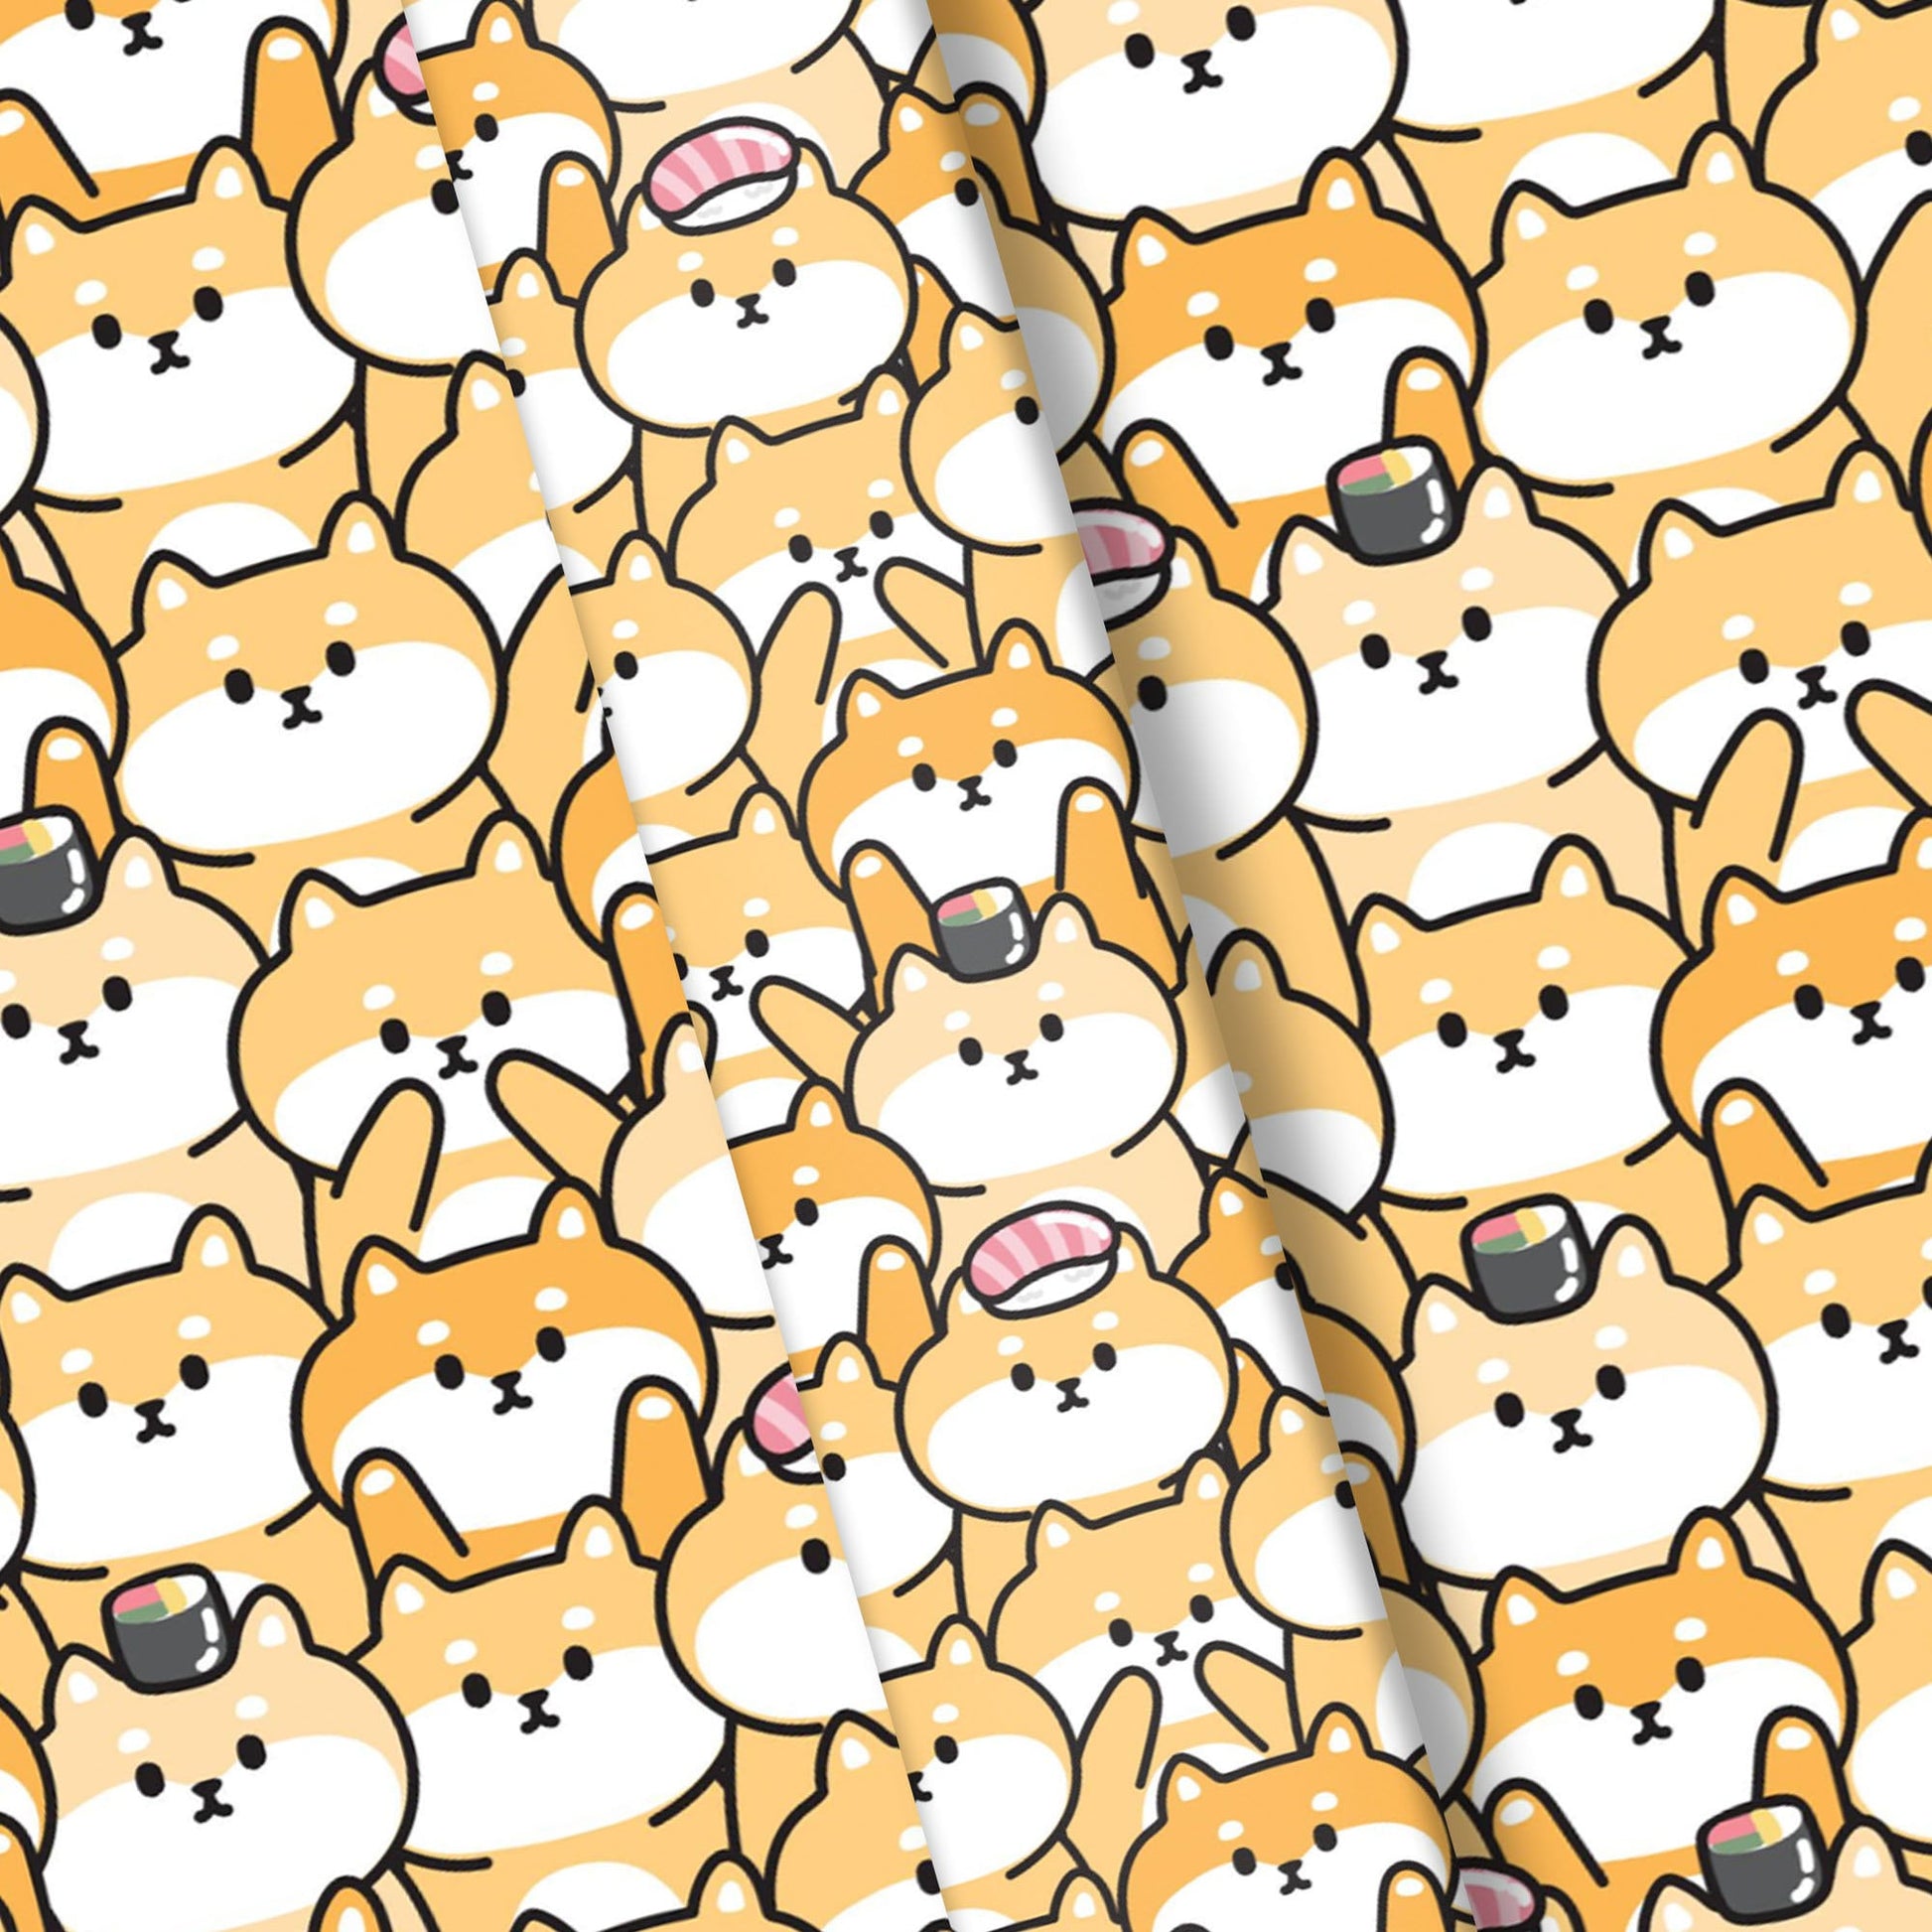 Shiba Inu Kawaii Dog Wrapping Paper, Birthday Wrapping Paper, Cute Gift Wrap, Kids Gift Present Paper Roll for Her